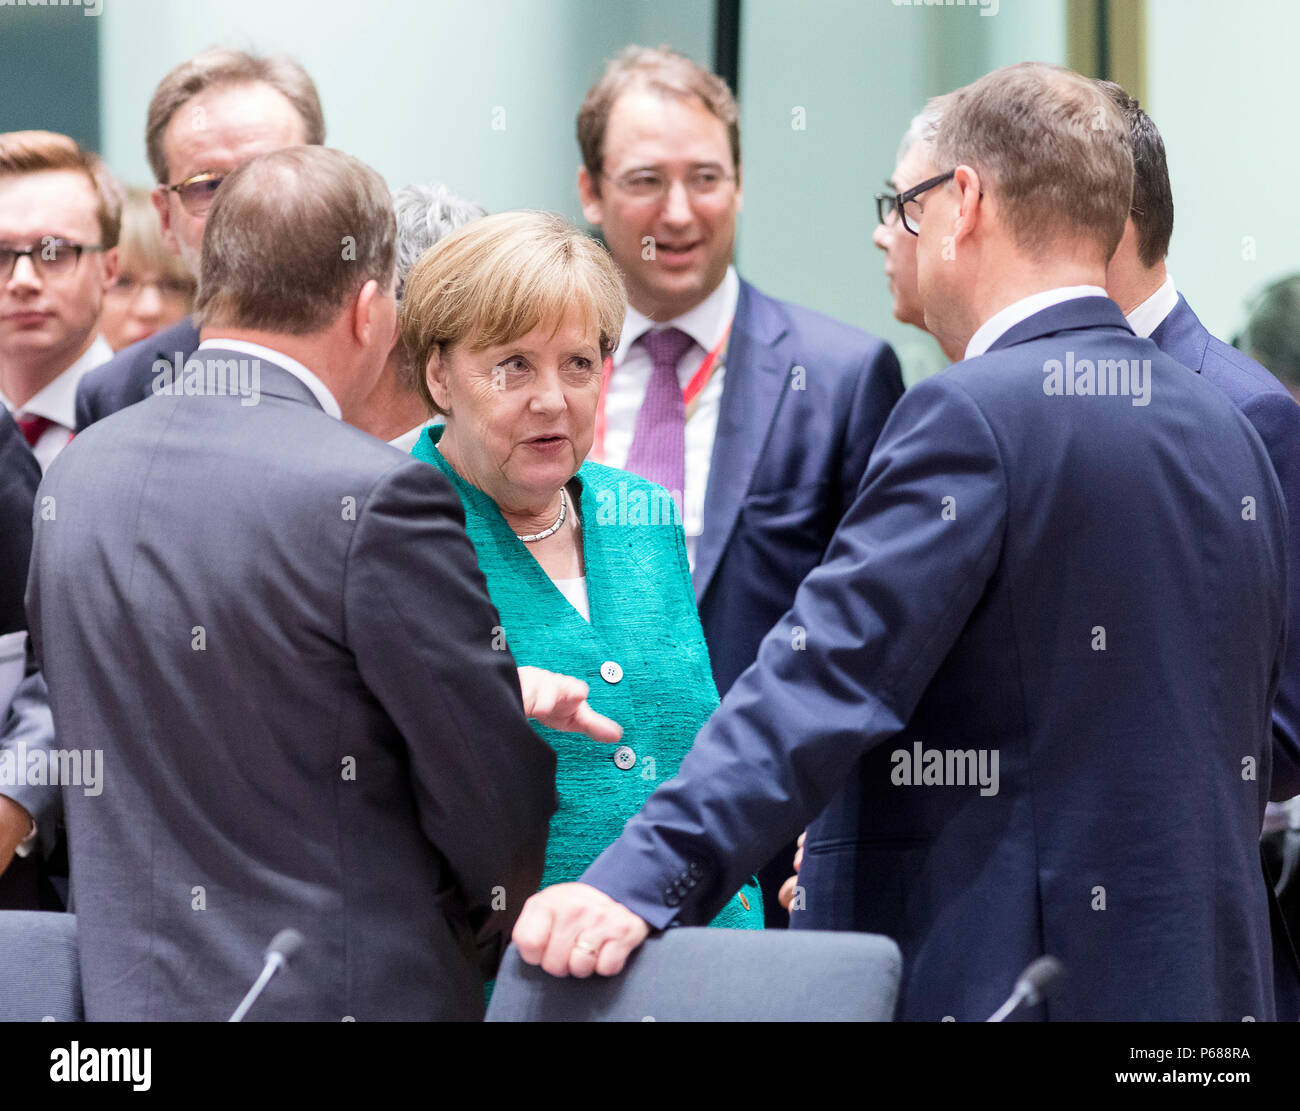 Brussels, Belgium. 28th June, 2018. German Chancellor Angela Merkel (C) talks with European leaders at the first day of a two-day EU Summit in Brussels, Belgium, June 28, 2018. Credit: Thierry Monass/Xinhua/Alamy Live News Stock Photo